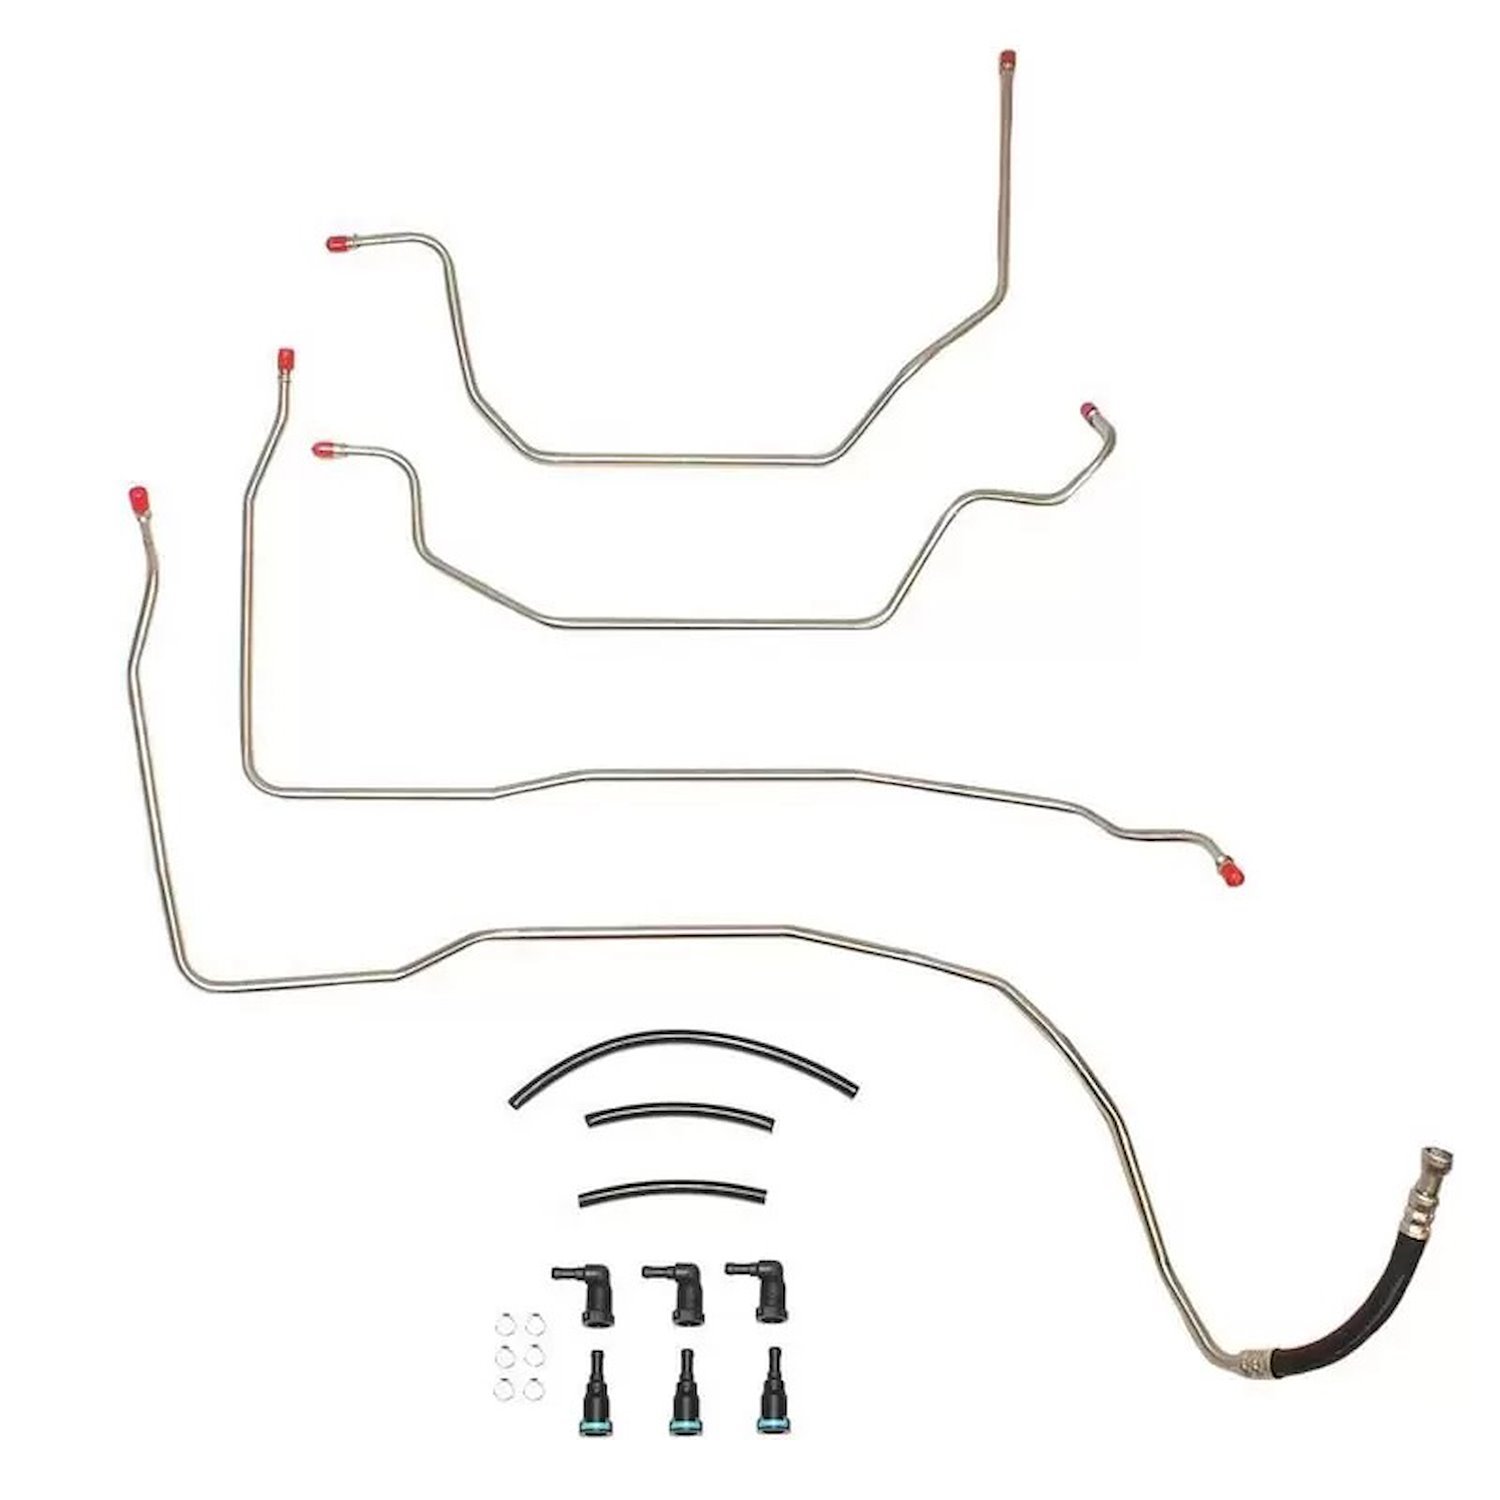 Complete Fuel Line Kit for 2003-2006 GM 1500 SUVs w/Flex Fuel [Stainless Steel]